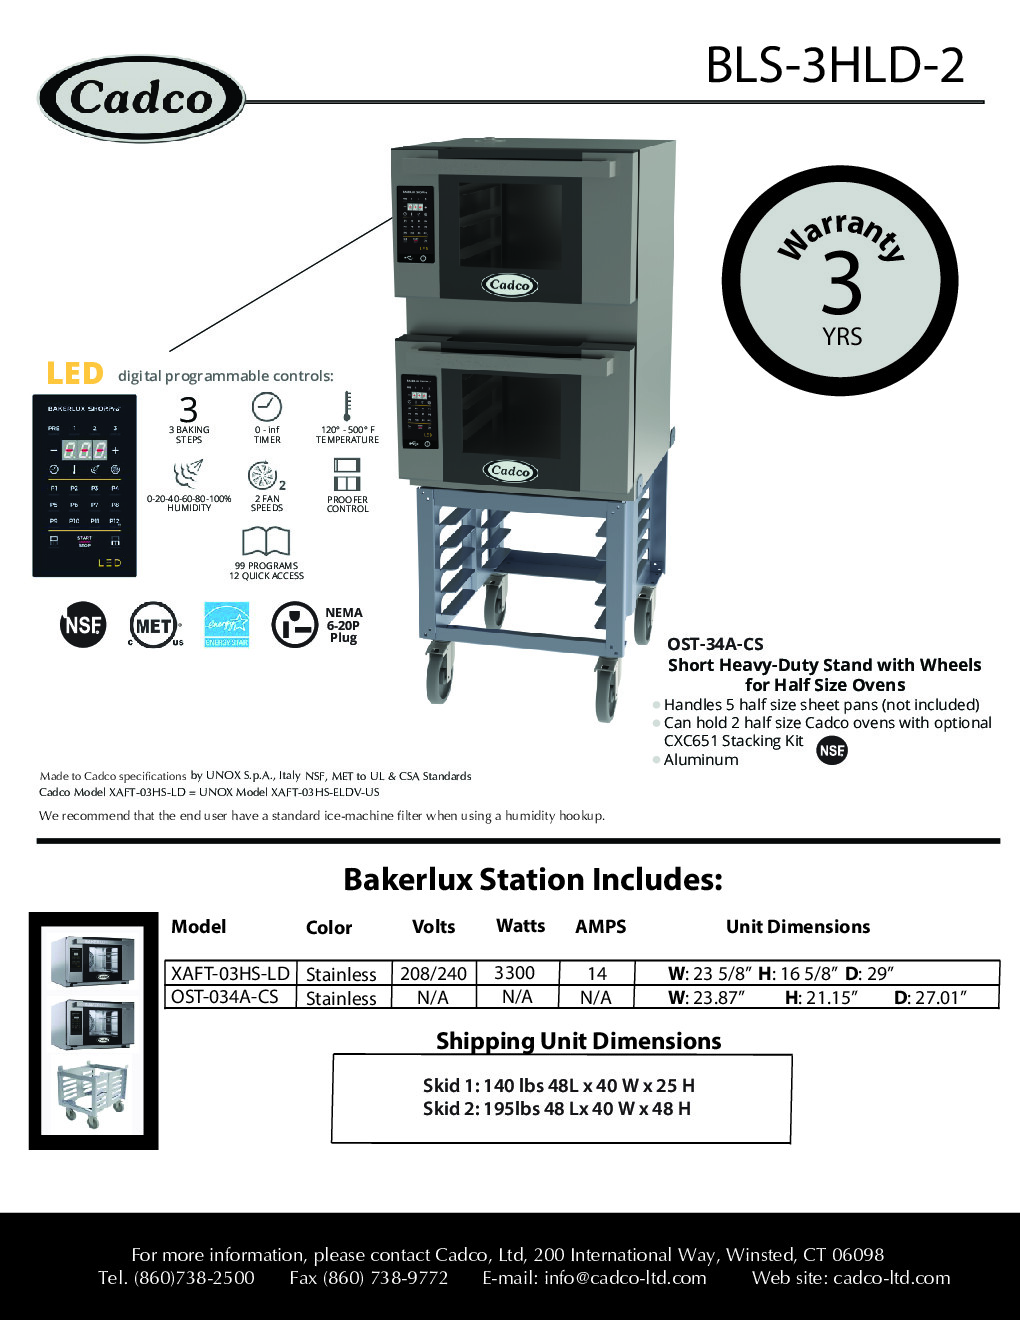 Cadco BLS-3HLD-2 Double-Deck Electric Convection Oven w/ Digital Touch Controls, Half-Size